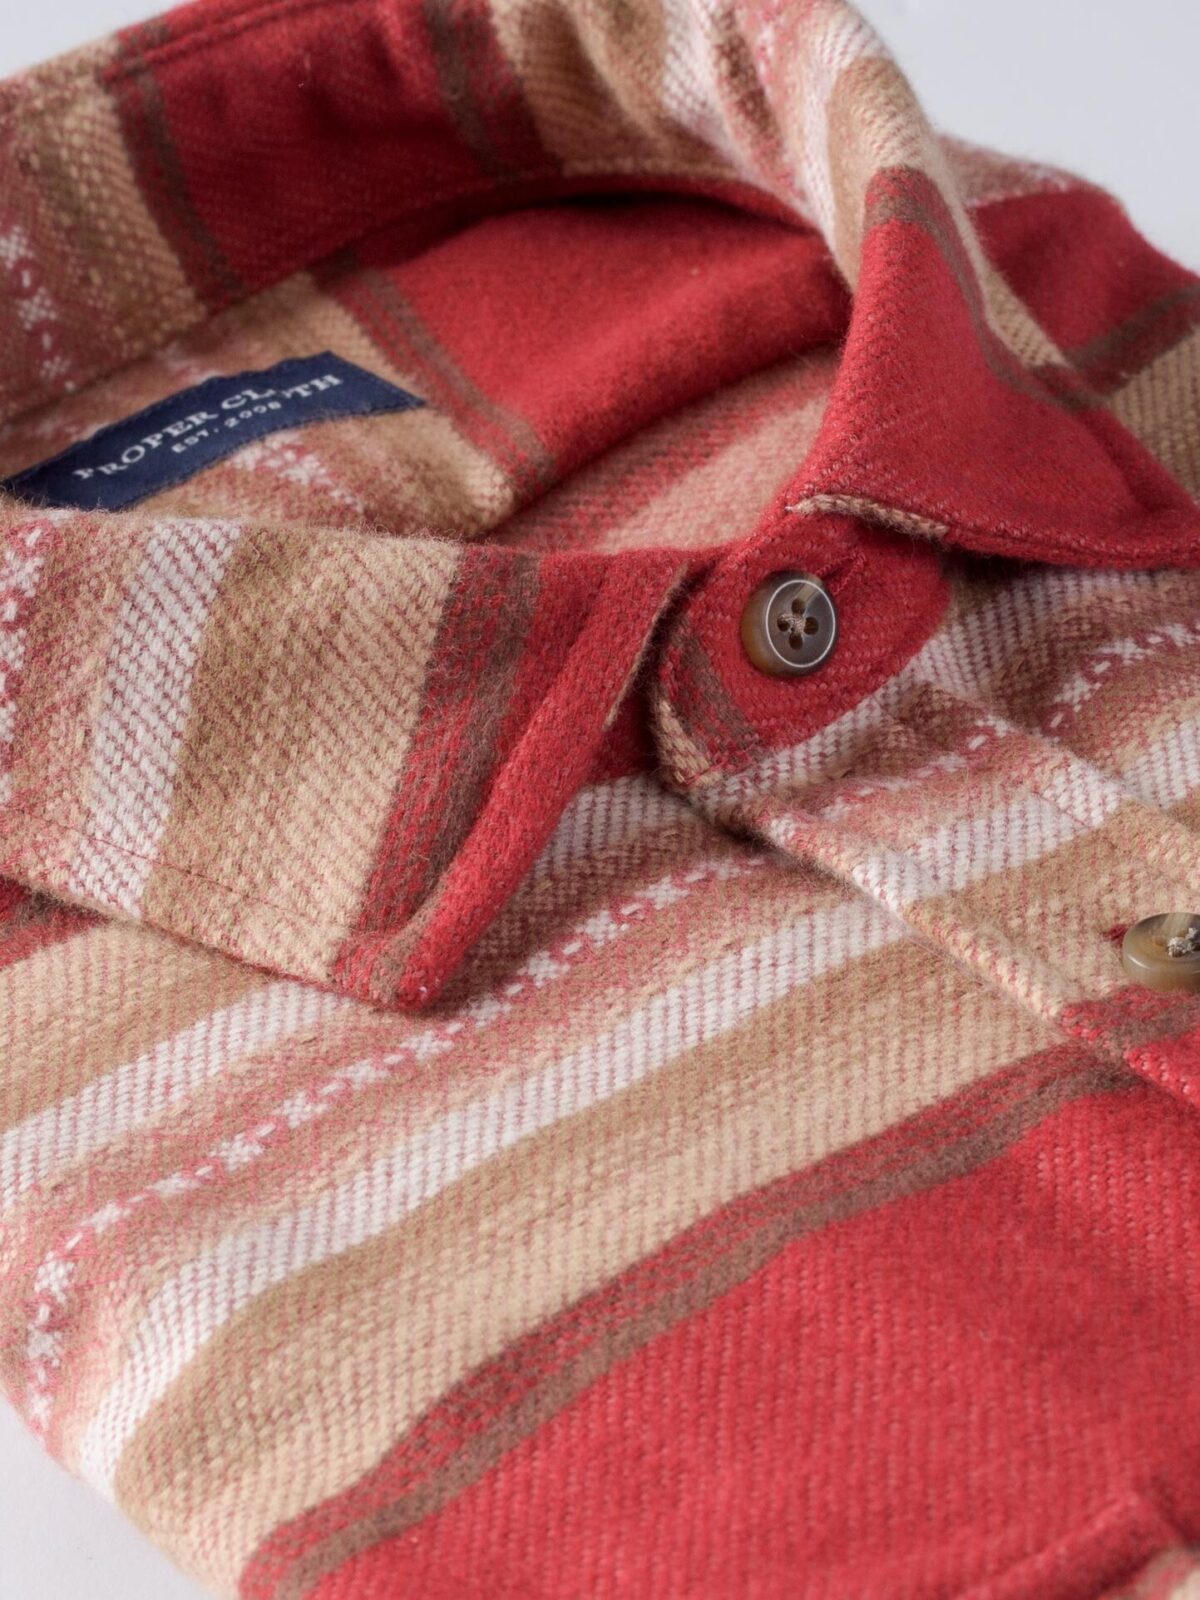 Navy and Sunset Southwest Blanket Stripe Shirt by Proper Cloth